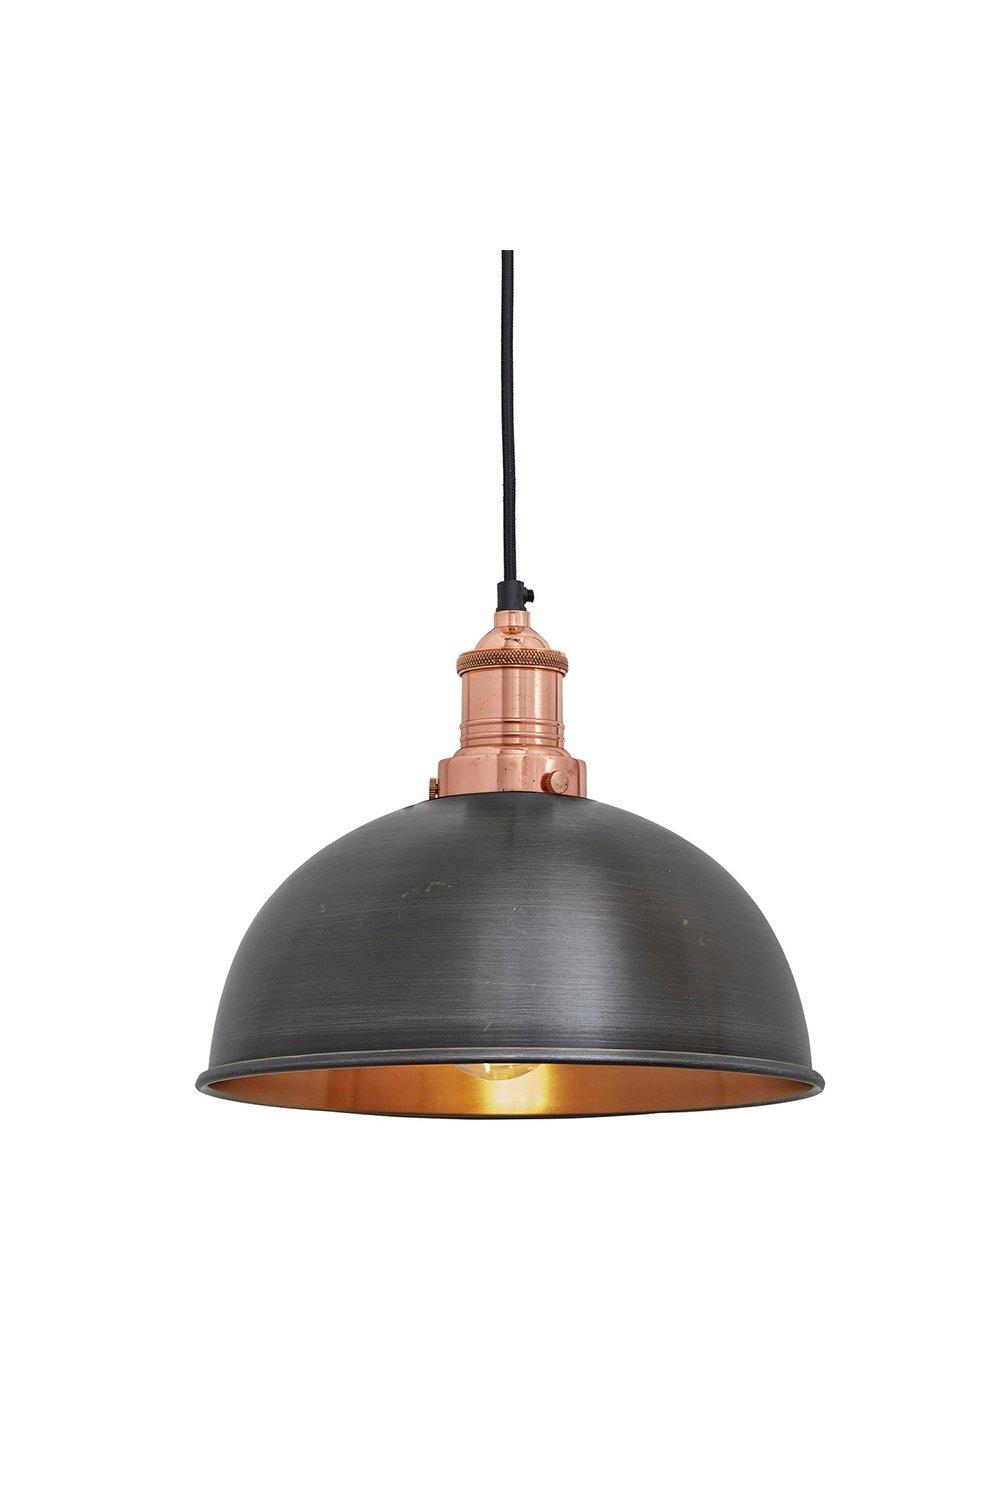 Brooklyn Dome Pendant, 8 Inch, Pewter & Copper, Copper Holder